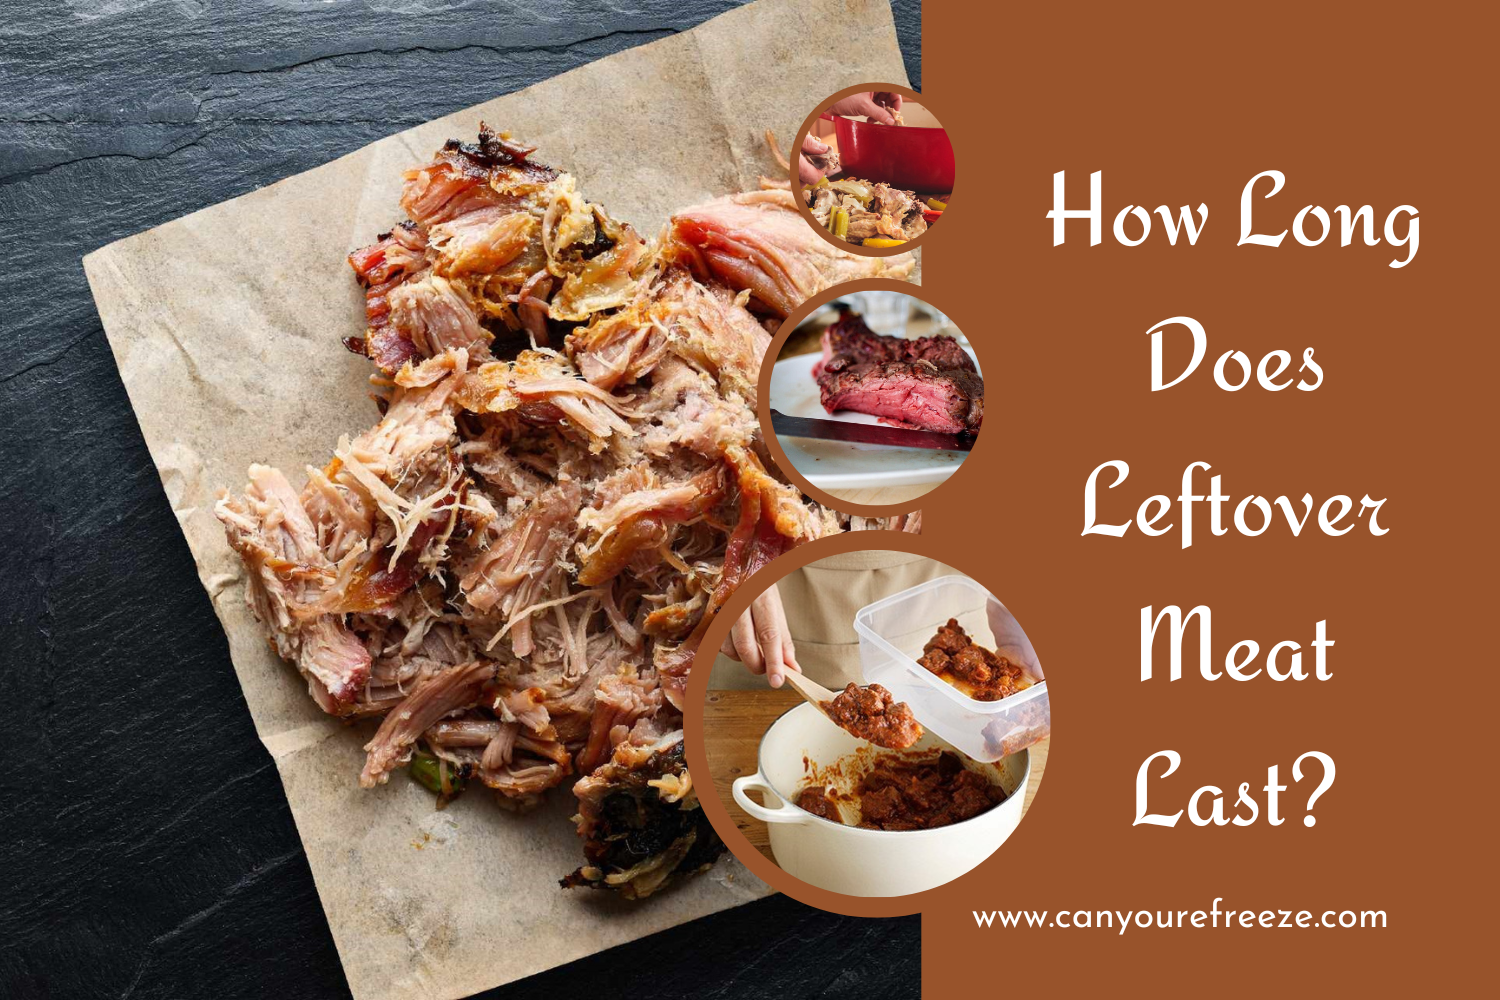 How Long Does Leftover Meat Last